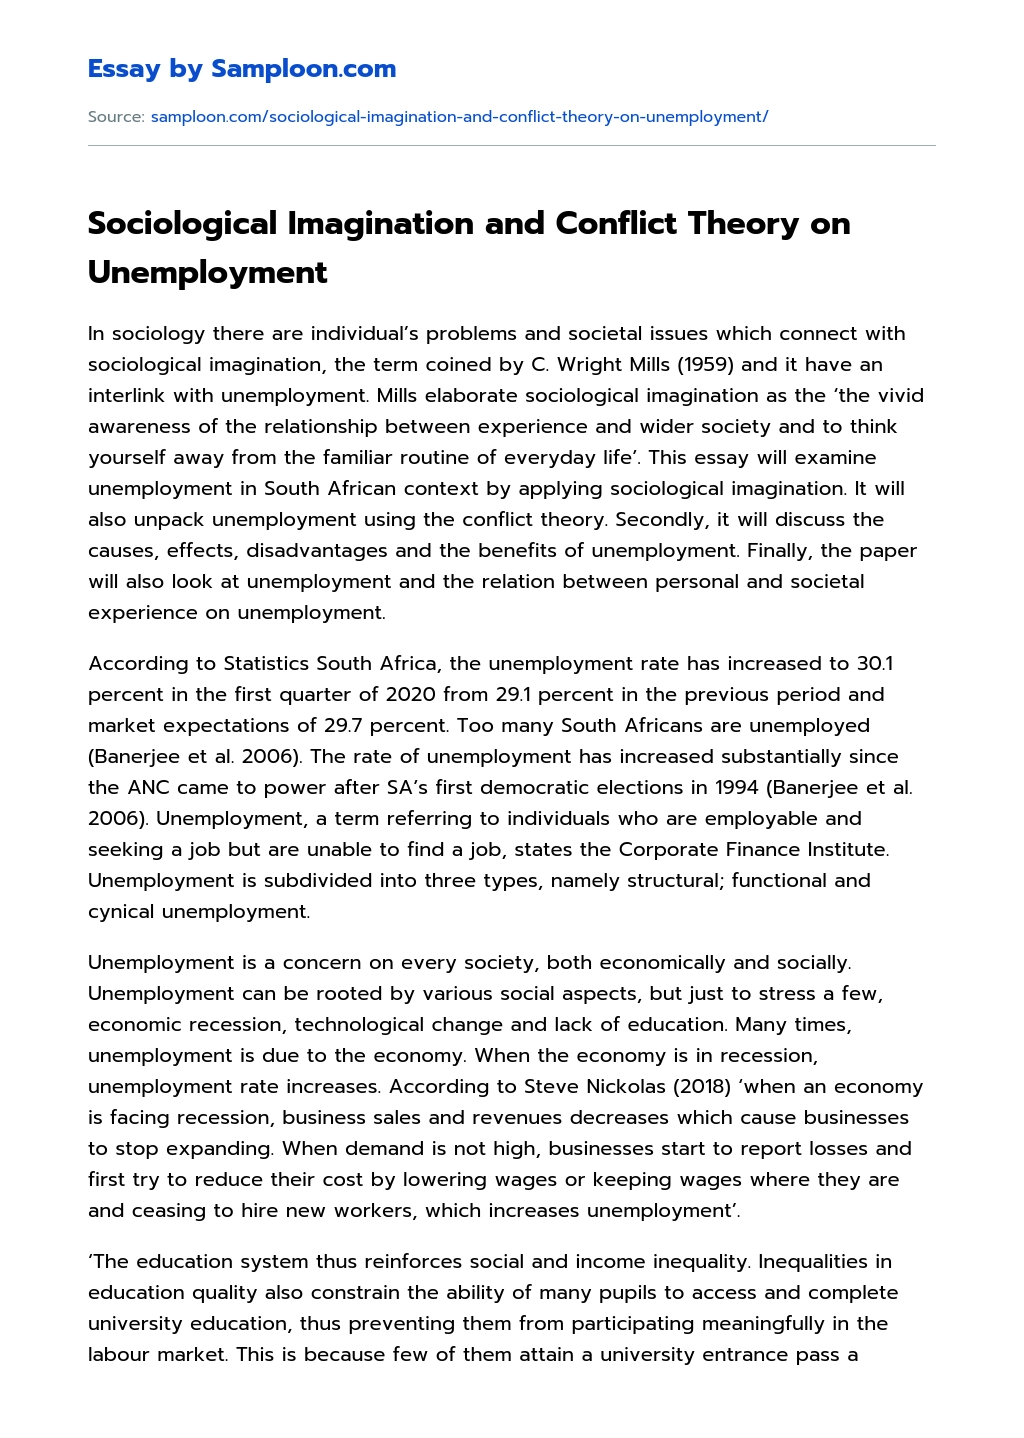 Sociological Imagination and Conflict Theory on Unemployment essay